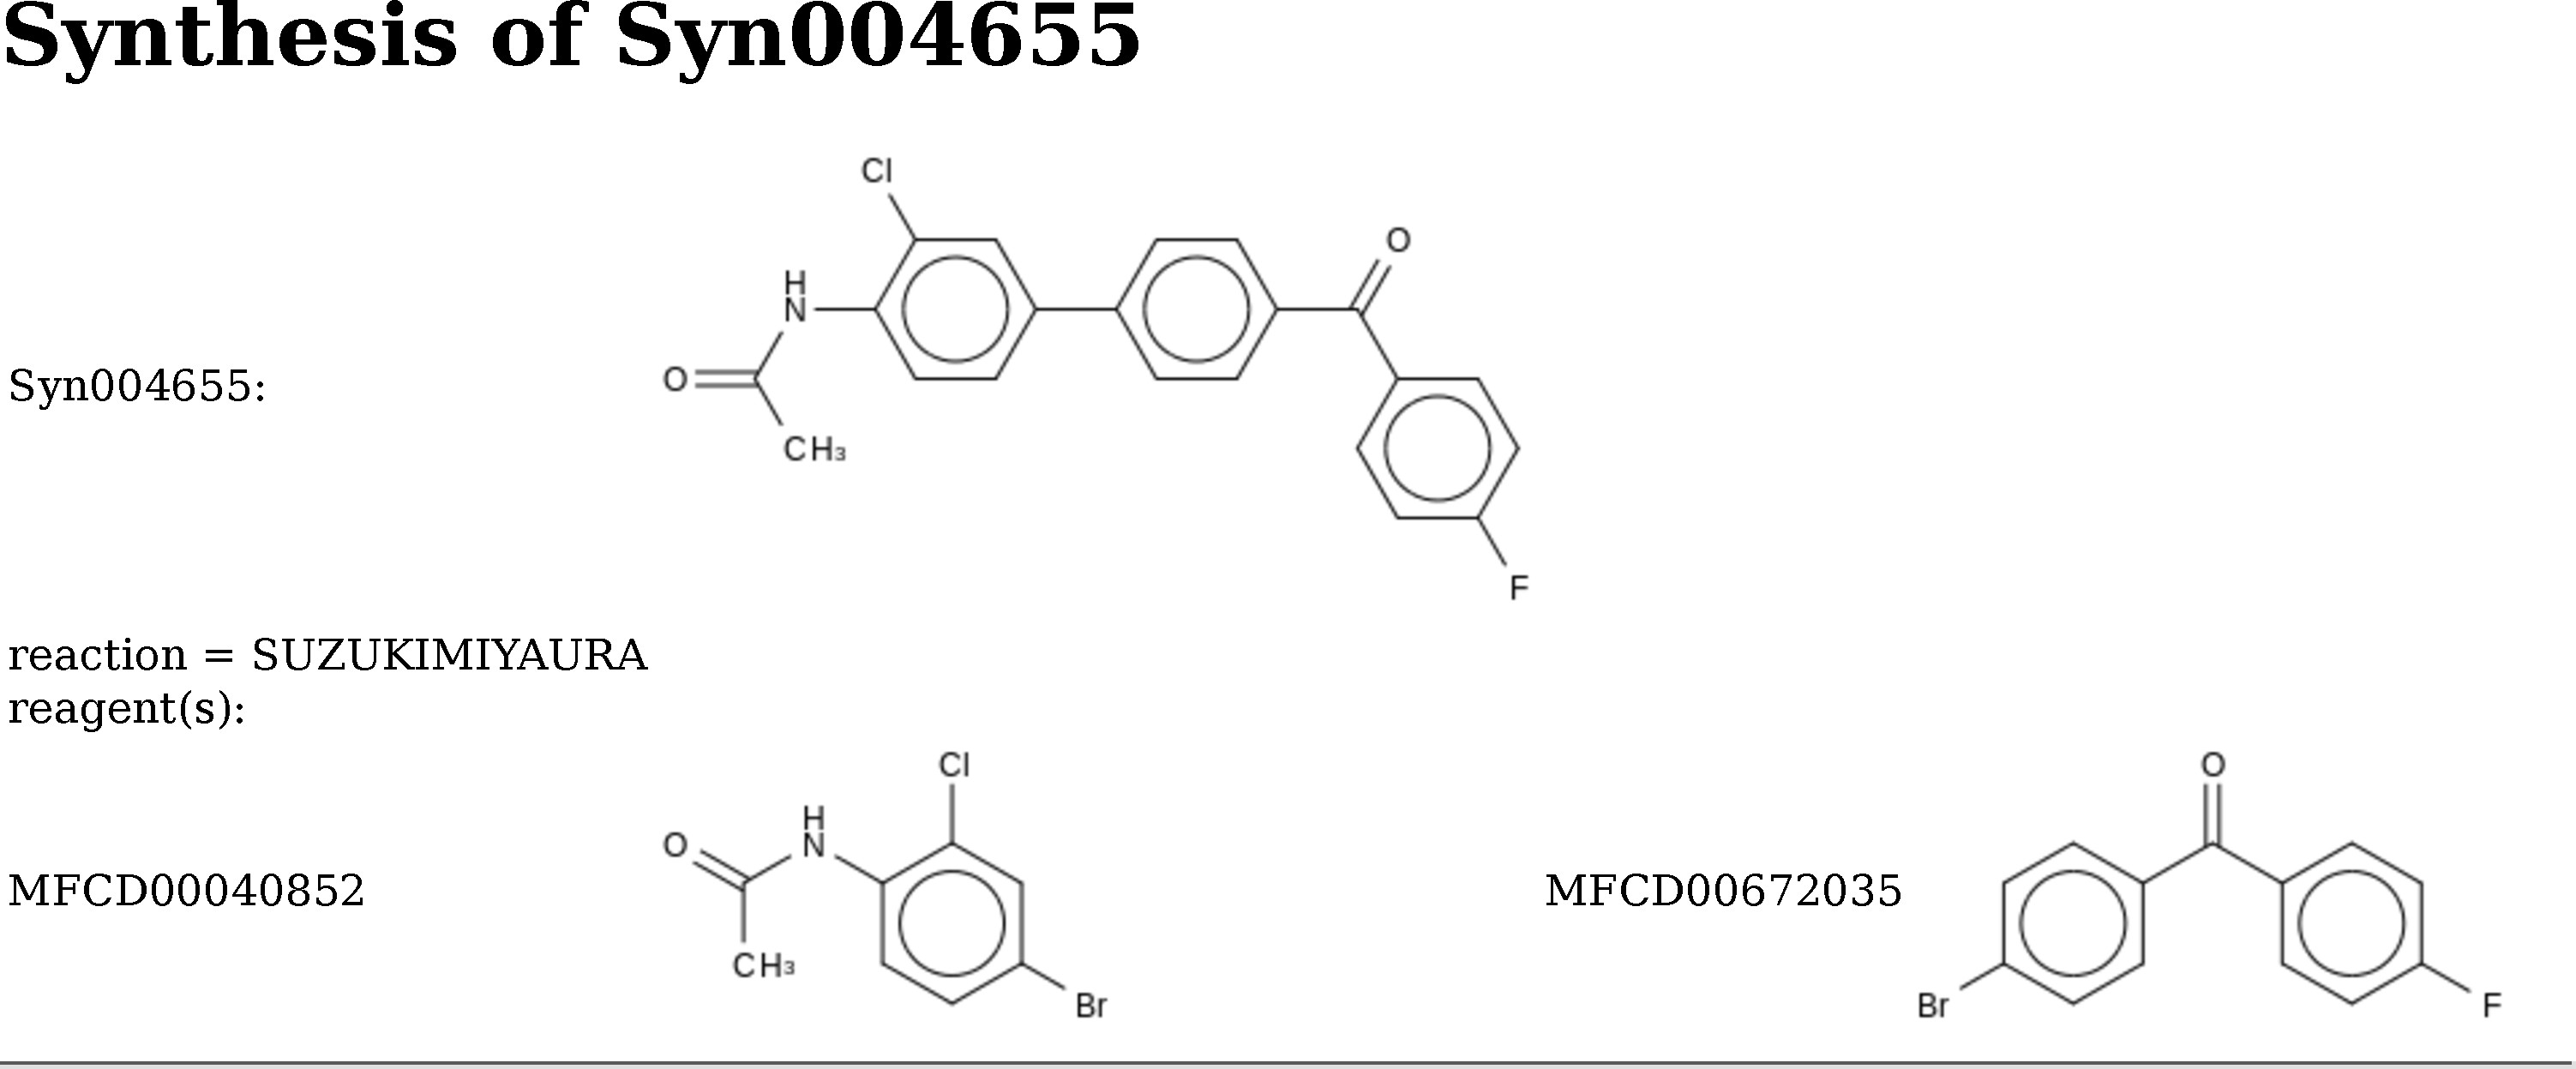 figure of Syn004655 synthesis, 2D